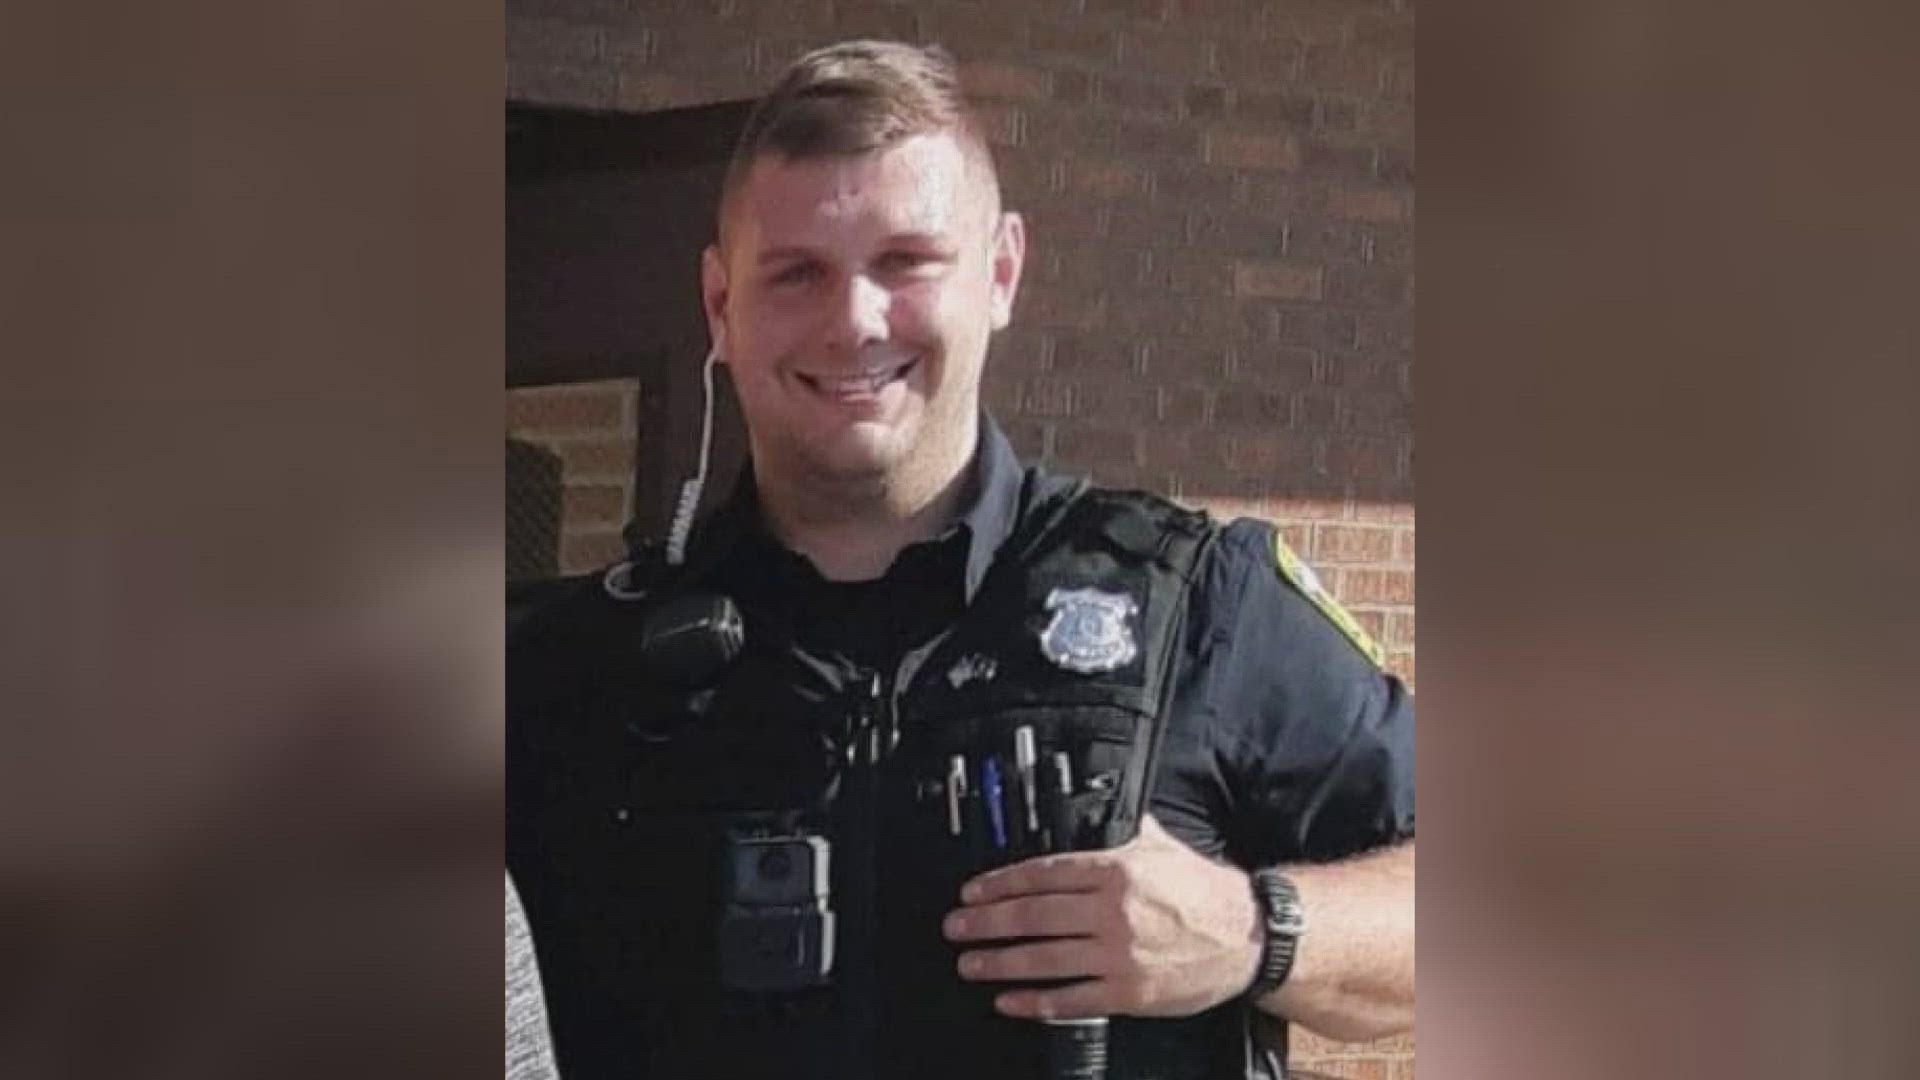 The suspect in the fatal shooting of Euclid police officer Jacob Derbin was found dead in a Shaker Heights residence after an hours-long standoff.